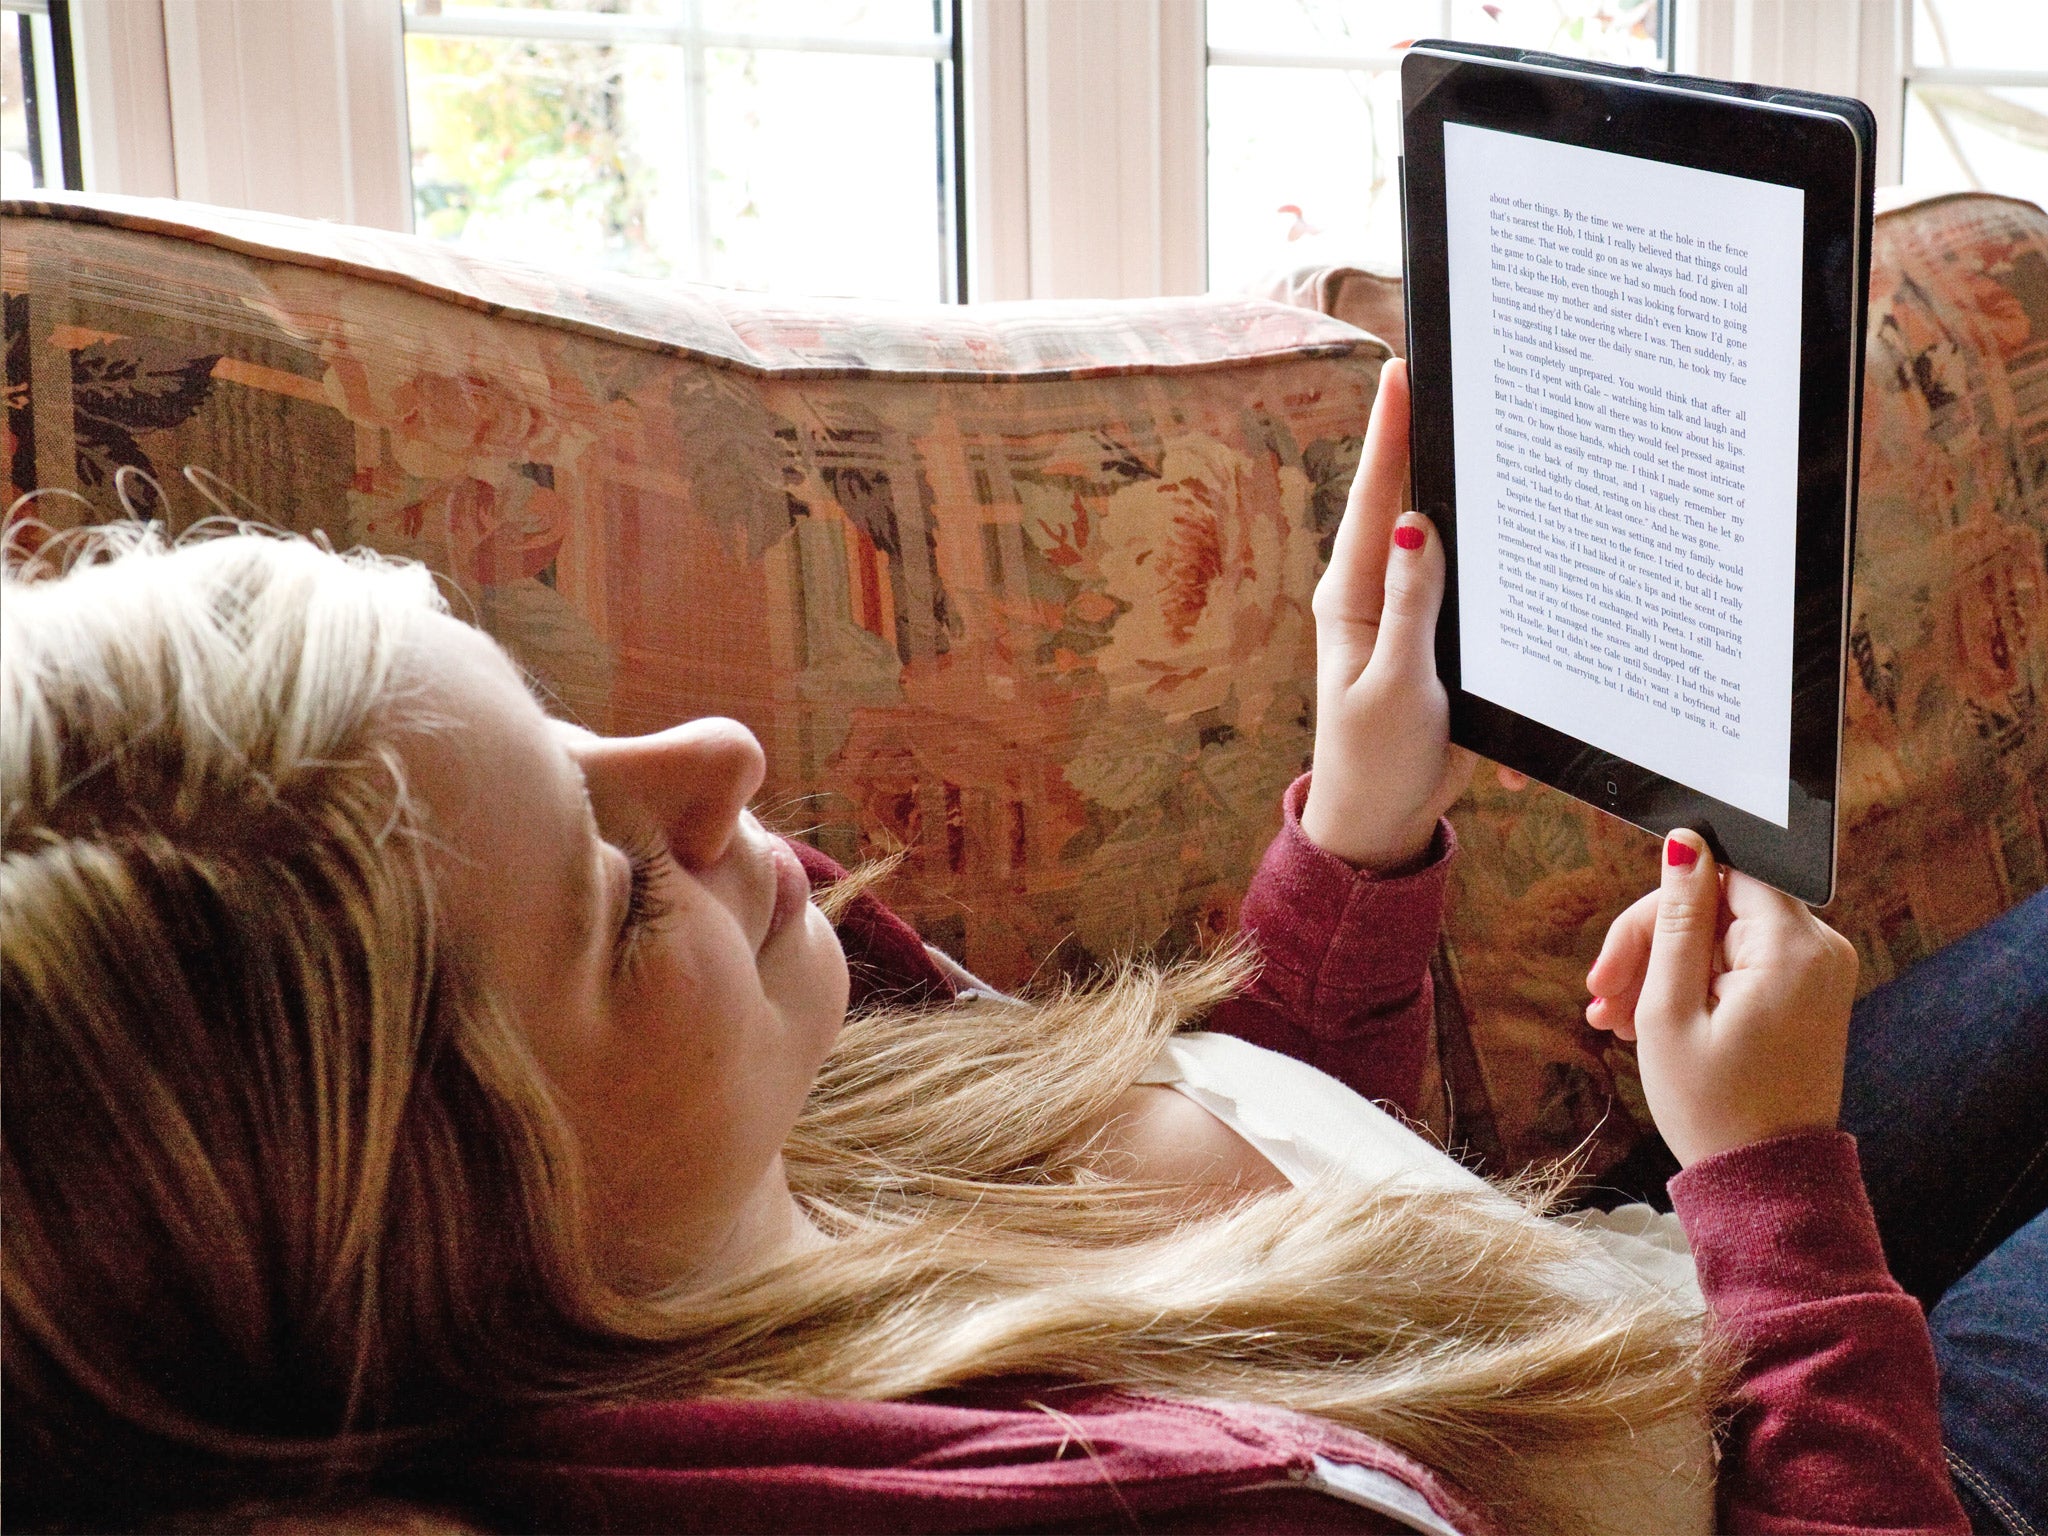 Absorbing, lengthy reads not only bring in readers, but entice advertisers too